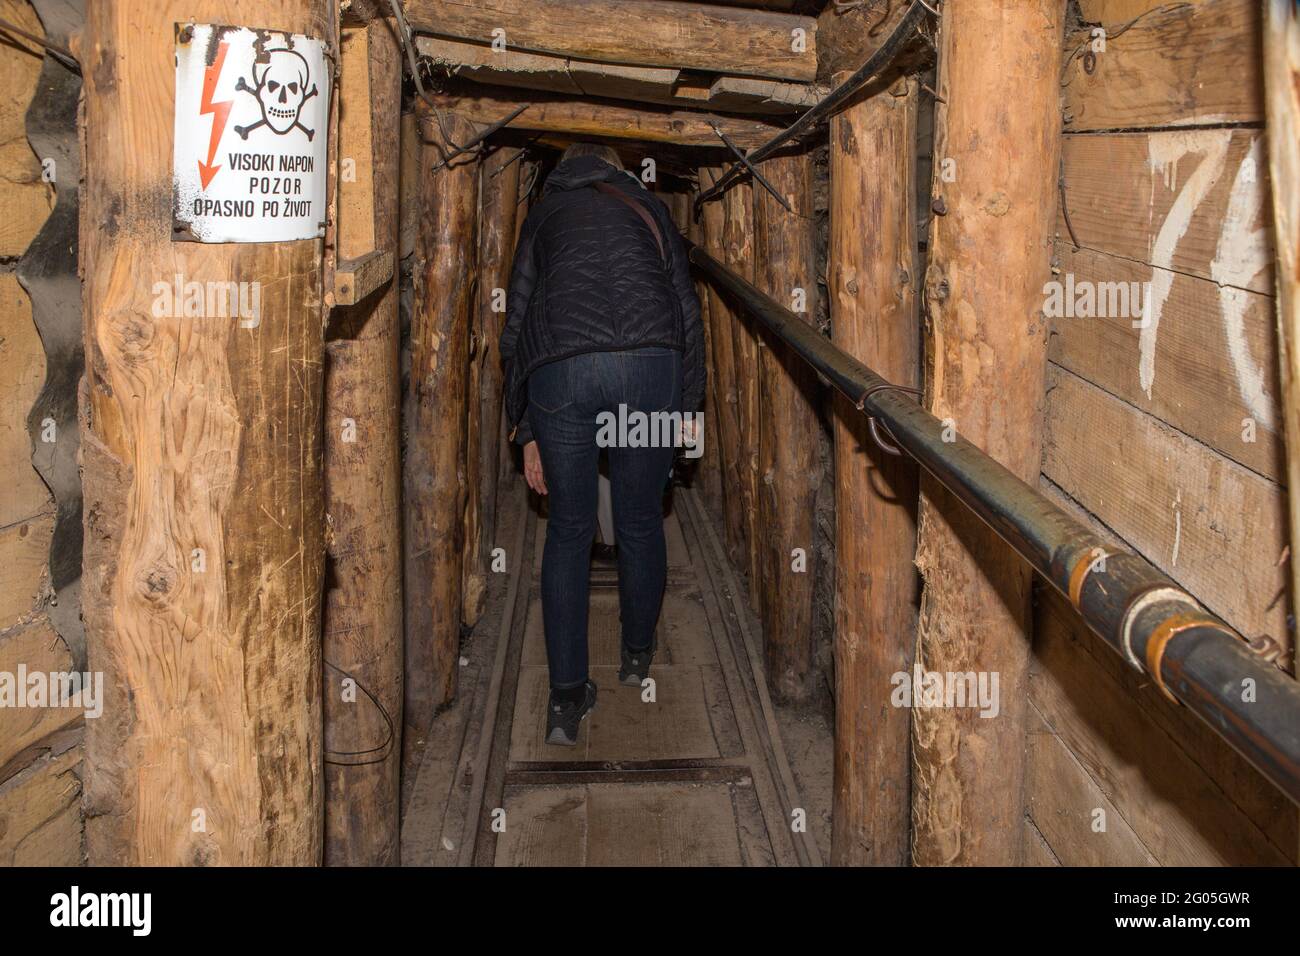 To give an idea of height, crouching visitor, Sarajevo Tunnel akaTunel spasa = Tunnel of rescue  or Tunnel of Hope, Sarajevo, Bosnia, Bosnia and Herze Stock Photo